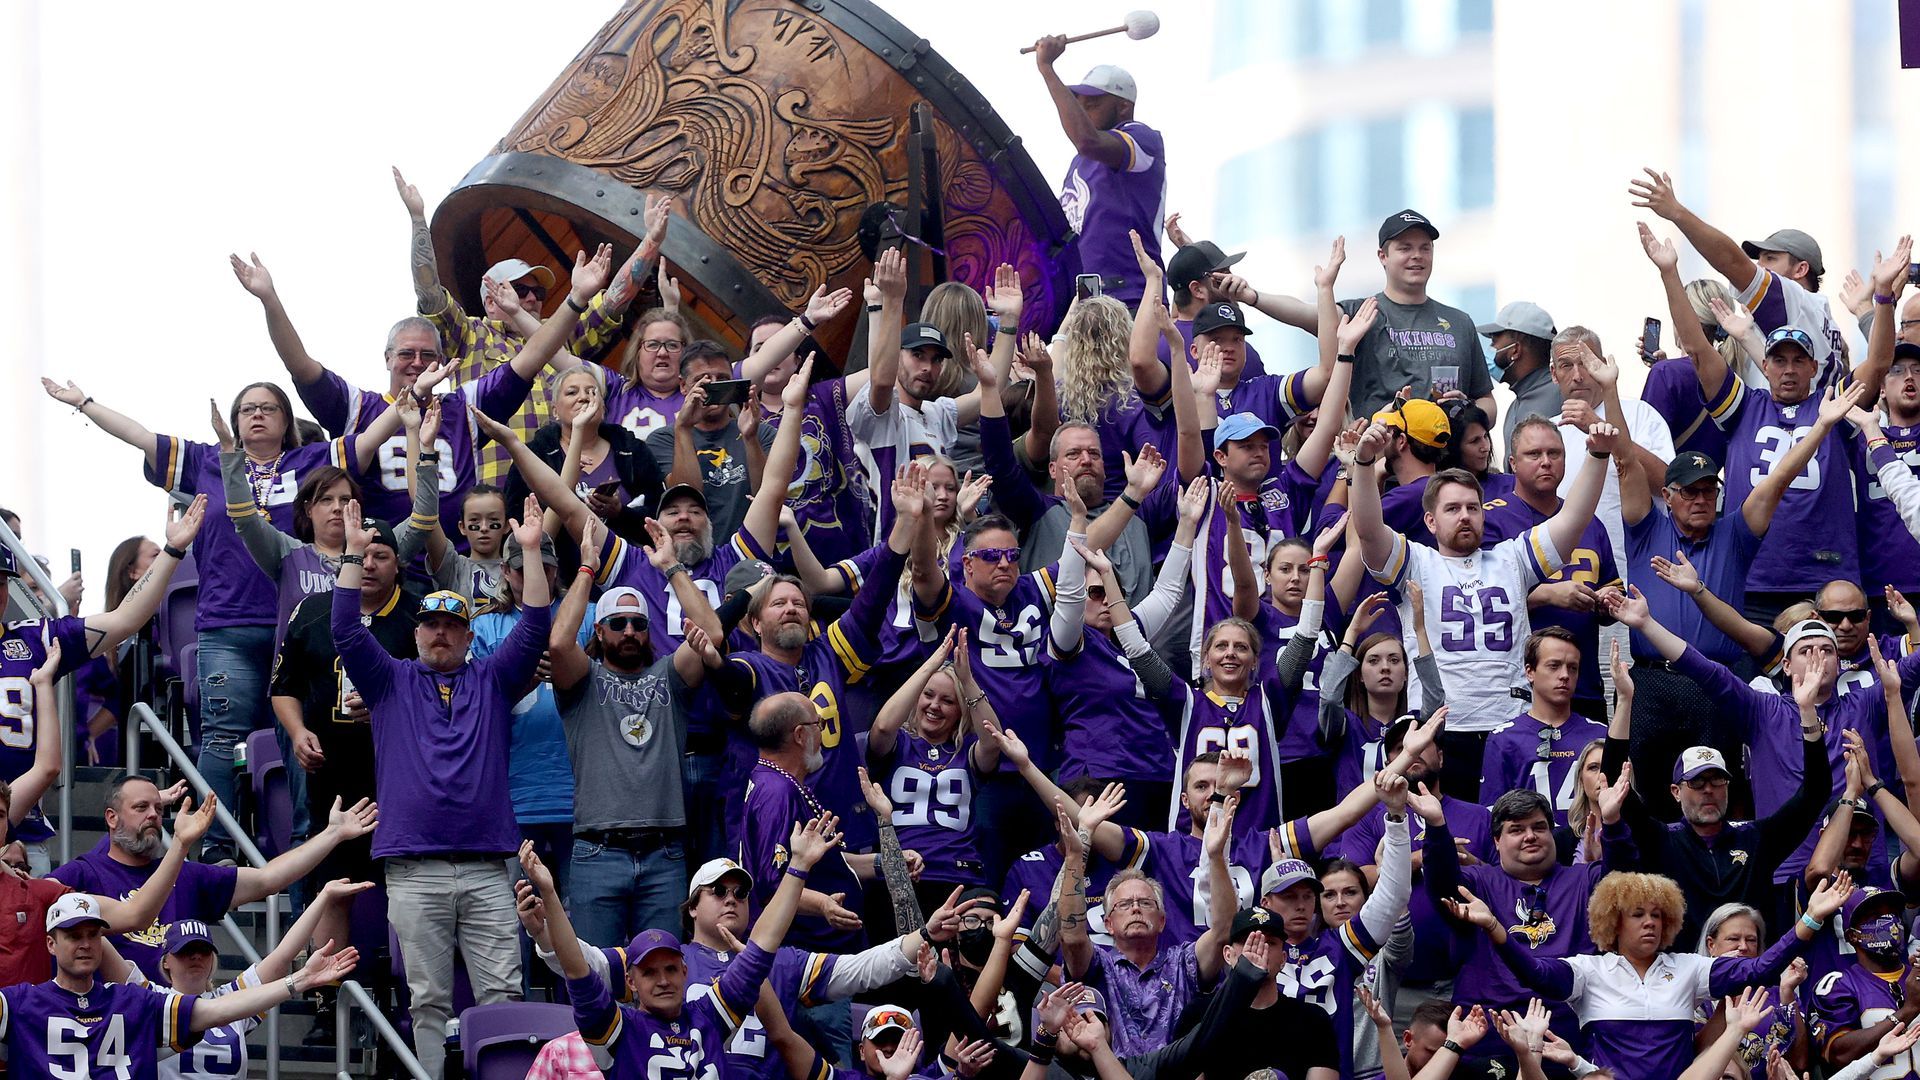 Minnesota Vikings fans cheer during the game against the Detroit Lions at U.S. Bank Stadium.